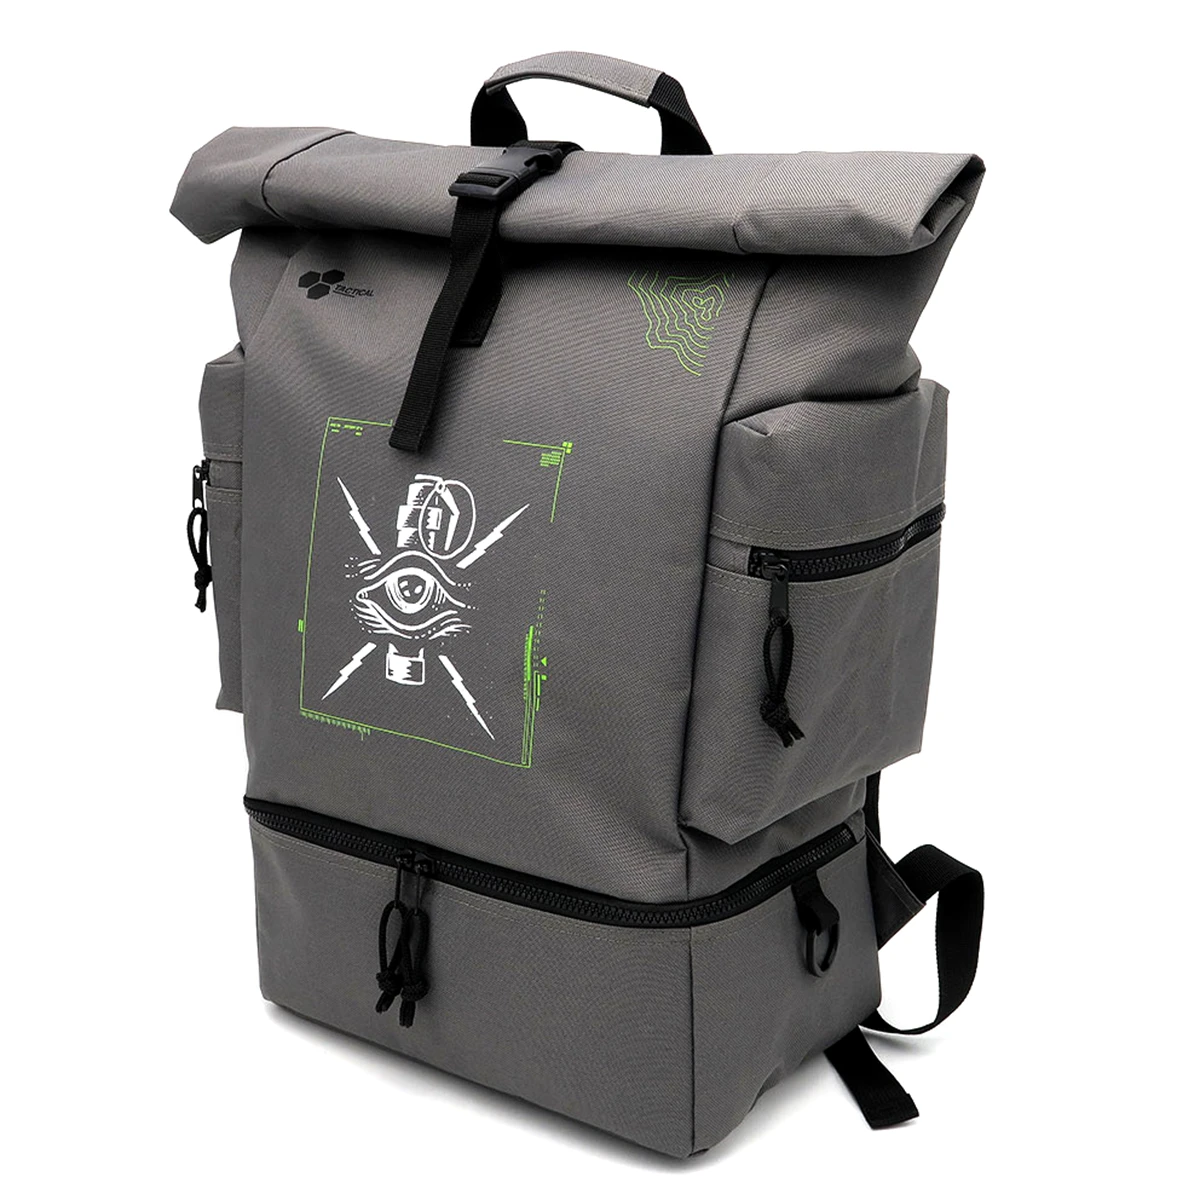 Call of Duty Rolltop Backpack "Blind" Grey Image 2